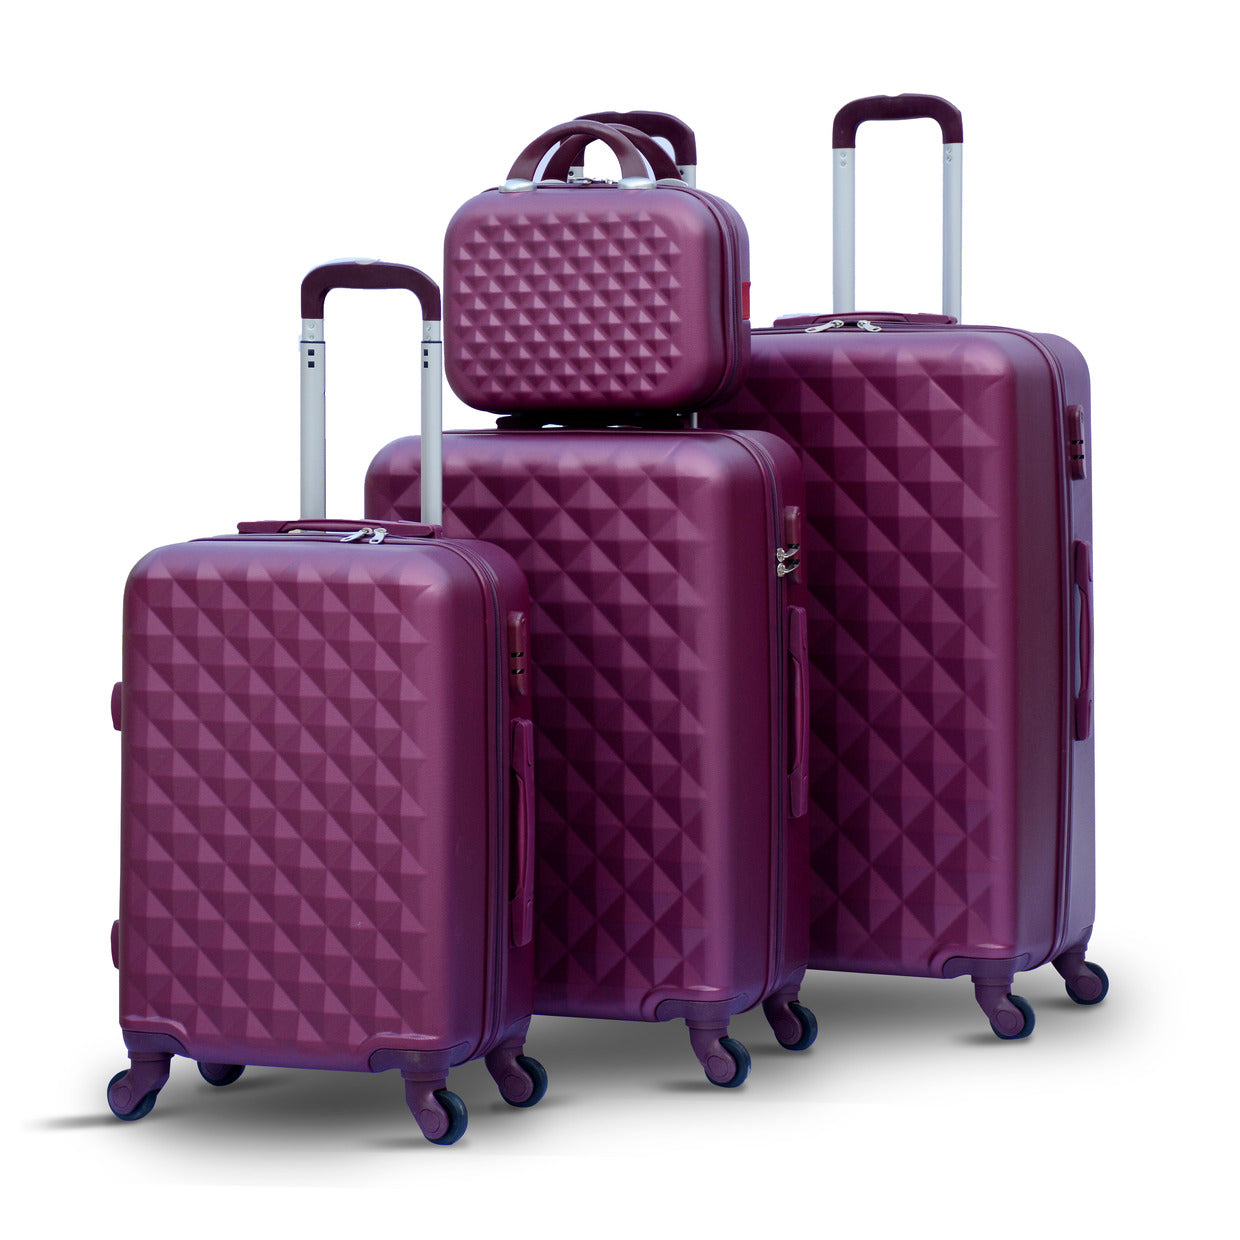 4 Piece Set 7” 20” 24” 28 Inches Diamond Cut ABS Lightweight Luggage Bag With Spinner Wheel